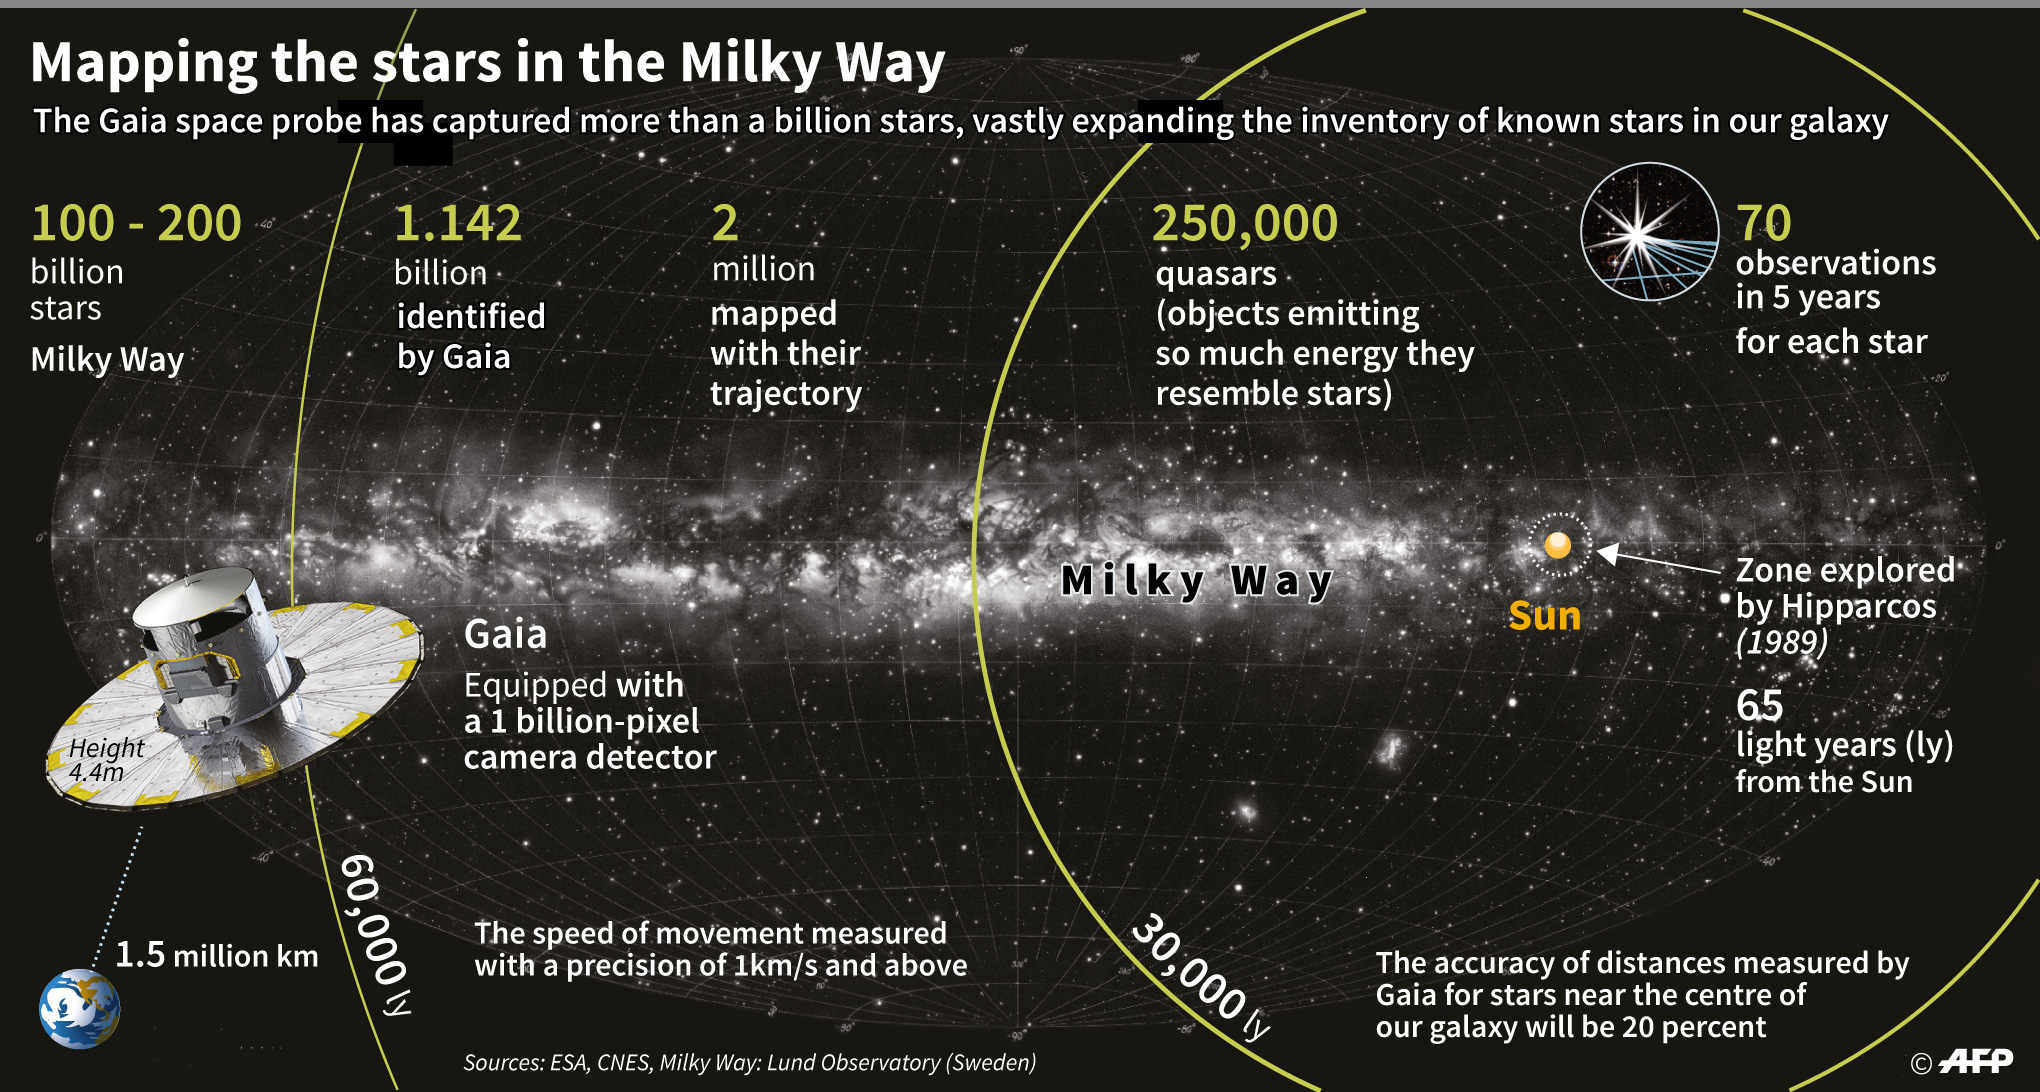 Mapping the stars in the Milky Way